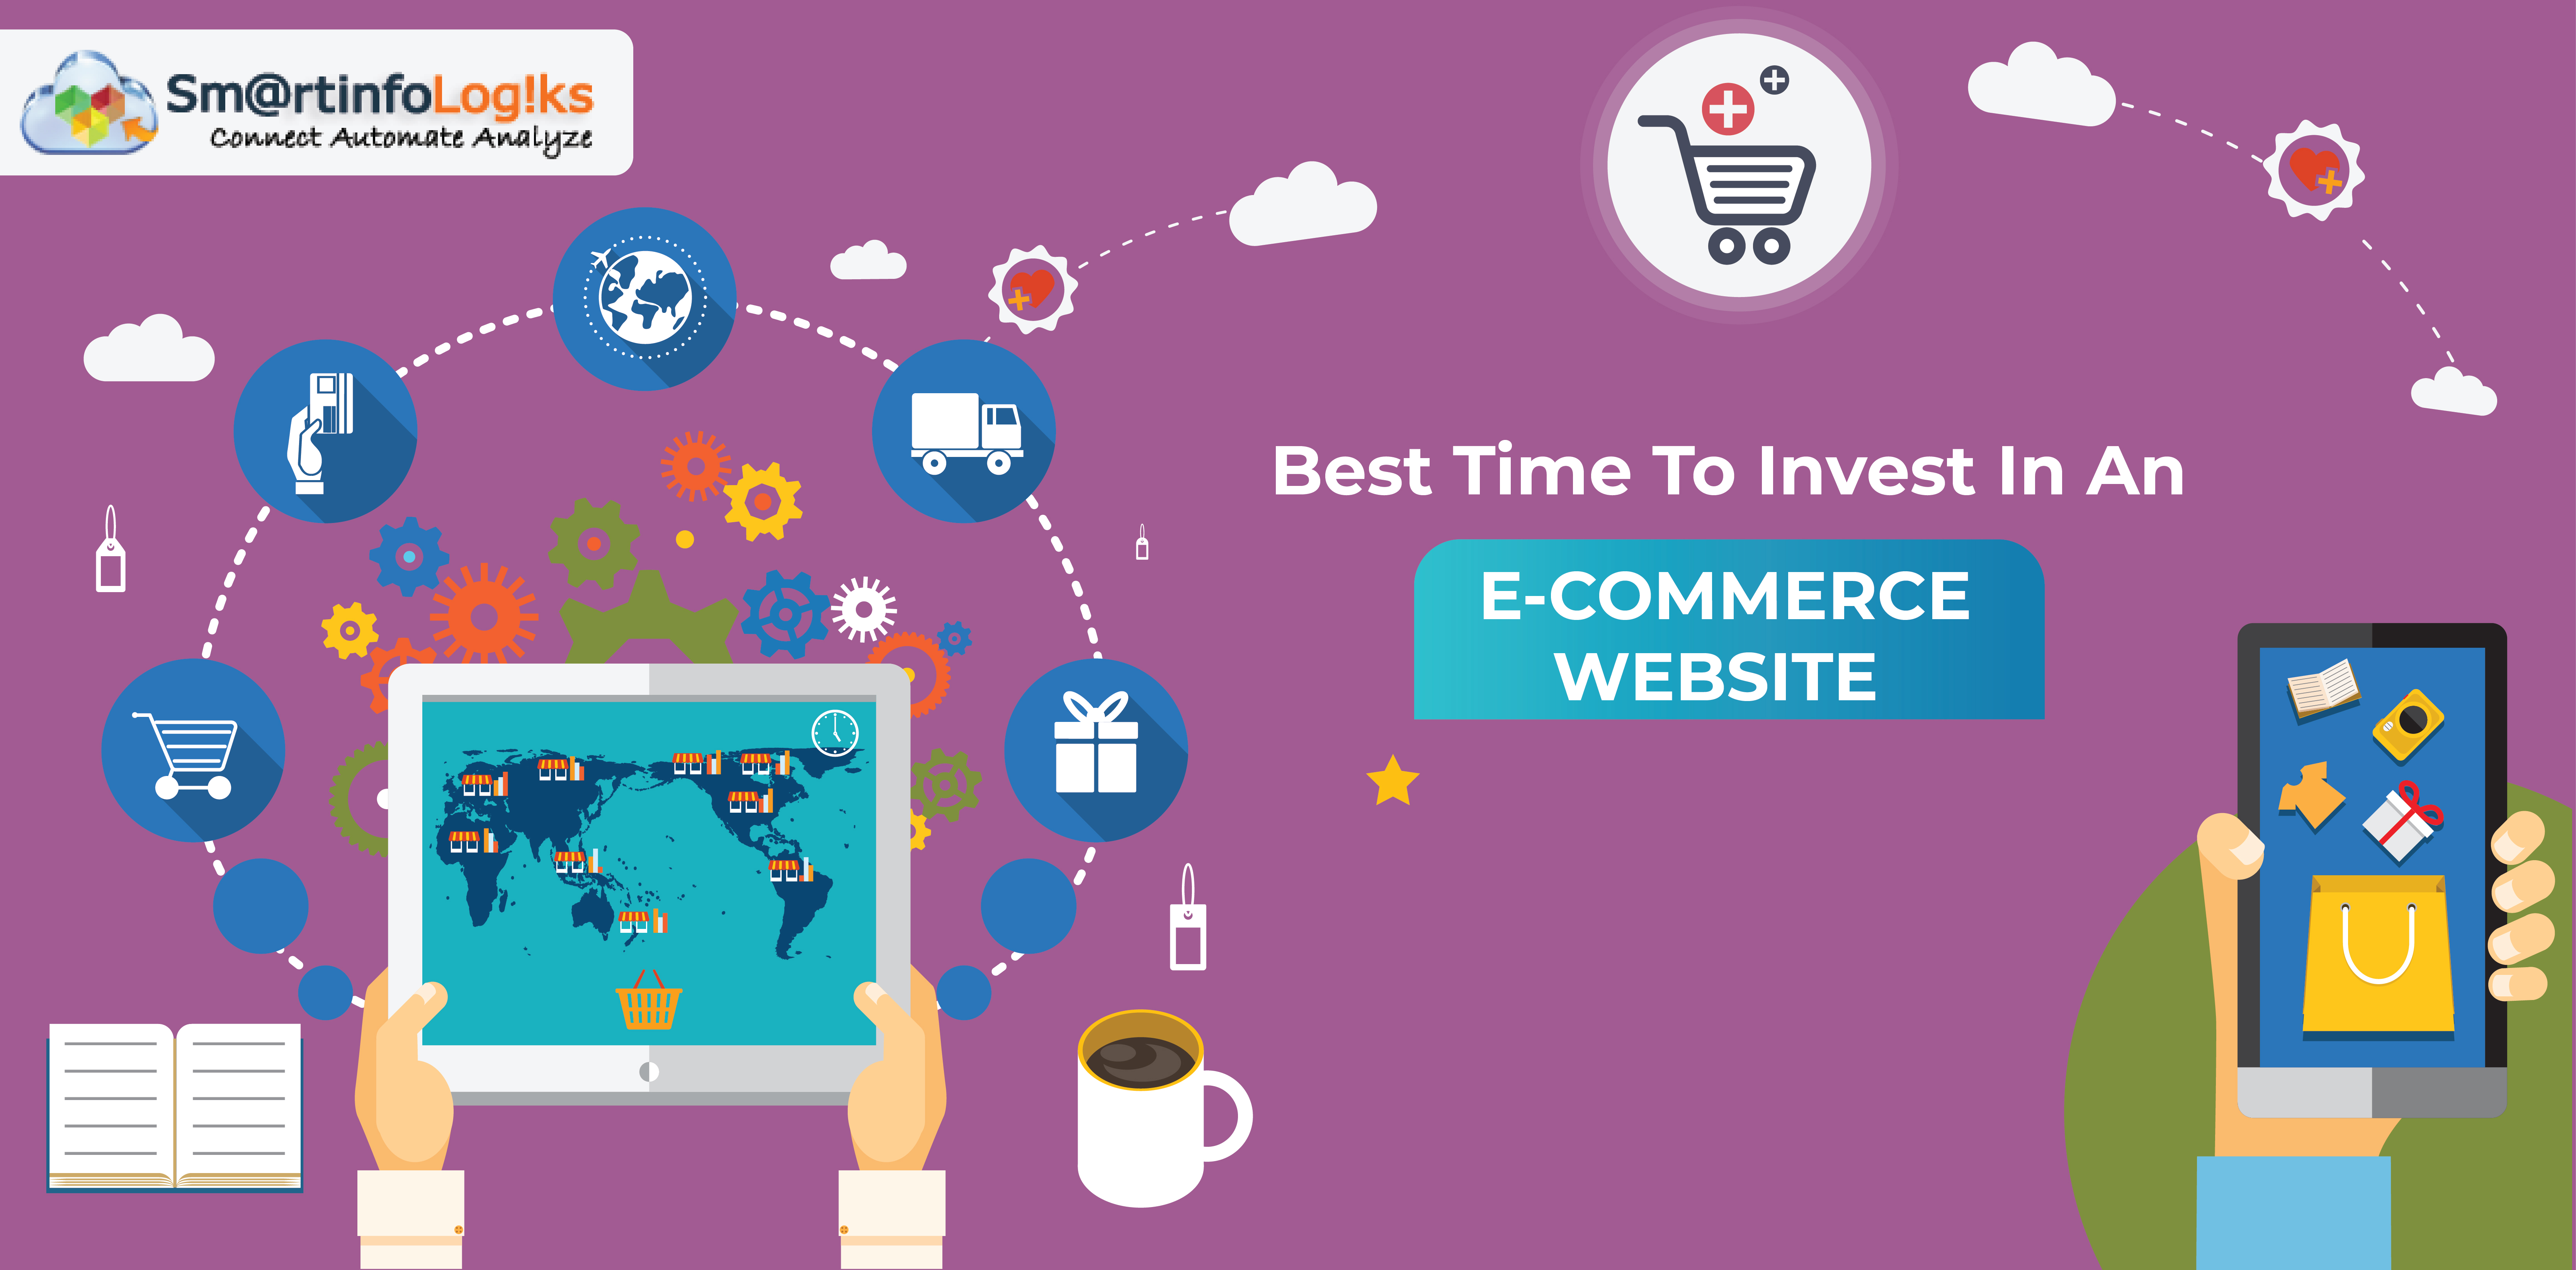 Is This The Best Time To Invest In An Ecommerce Website Right Away?